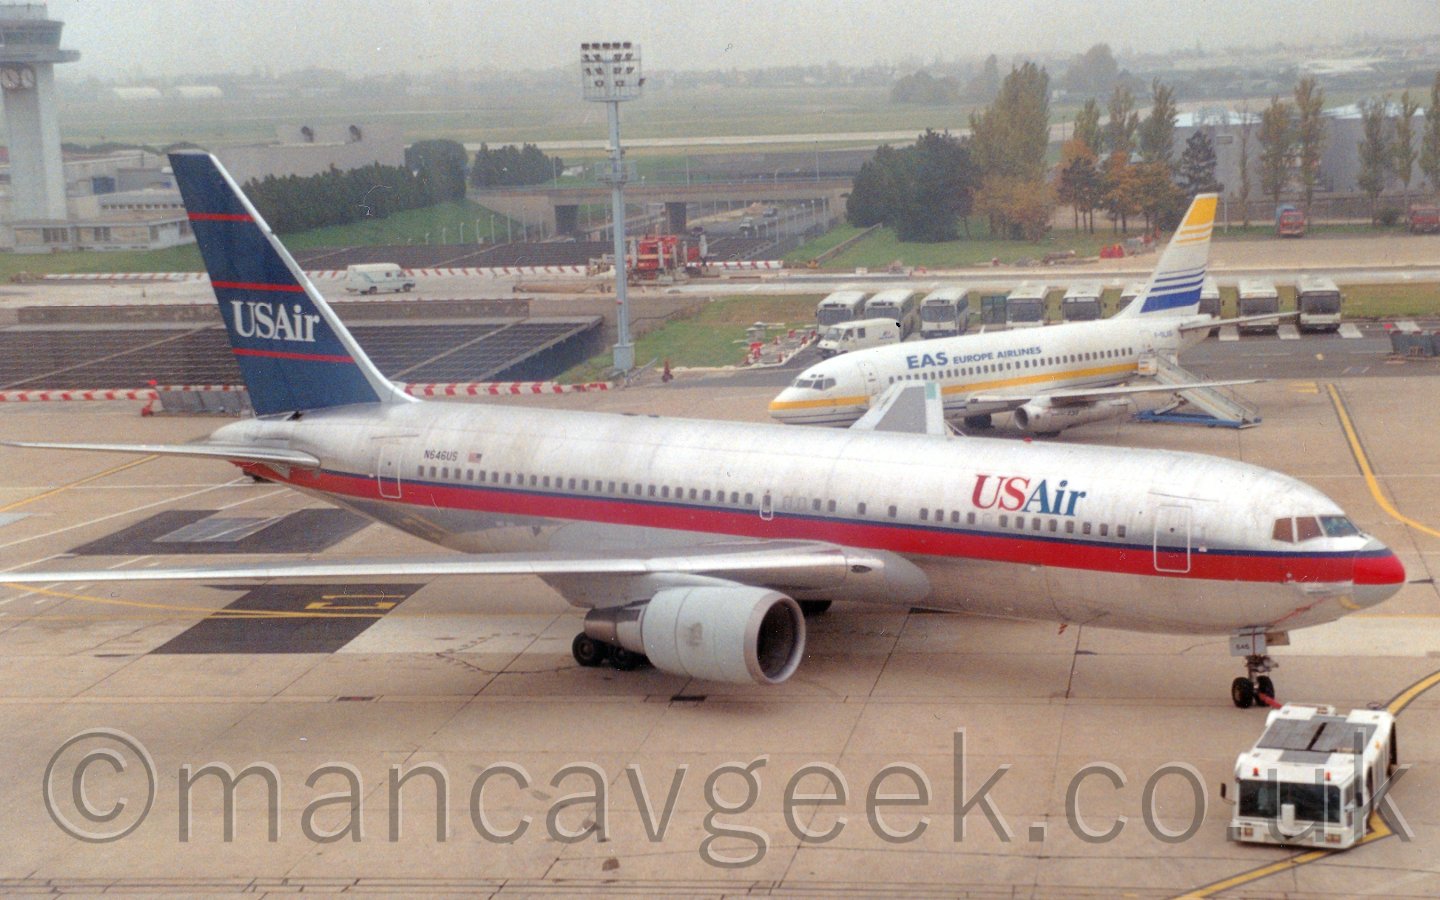 Side view of a twin engined jet airliner being pushed back from it's stand, facing to the right. The plane is mostly in a bare metal finish, with a thick red stripe running along the body, alongside a very narrow dark blue stripe. There are "USAir" titles on the upper forward fuselage in blue and red. The tail is dark blue, with thin red pinstripes, running from front to back, and white "USAir" titles. There is a red pole attached to the nose wheels, the other end of which is attached to a white tug aircraft, which is pushing it backwards. The nose cone is obviously originally from another plane, the colours being very slightly mis-matched and mis-aligned. In the background, a smaller, white twin engined jet airliner is parked facing to the left, in front of a row of buses, next to a tall lighting pole. Trees fill the middle-distance, with large grassed areas and more trees vanishing in to haze in the far distance, under a hazy grey sky.